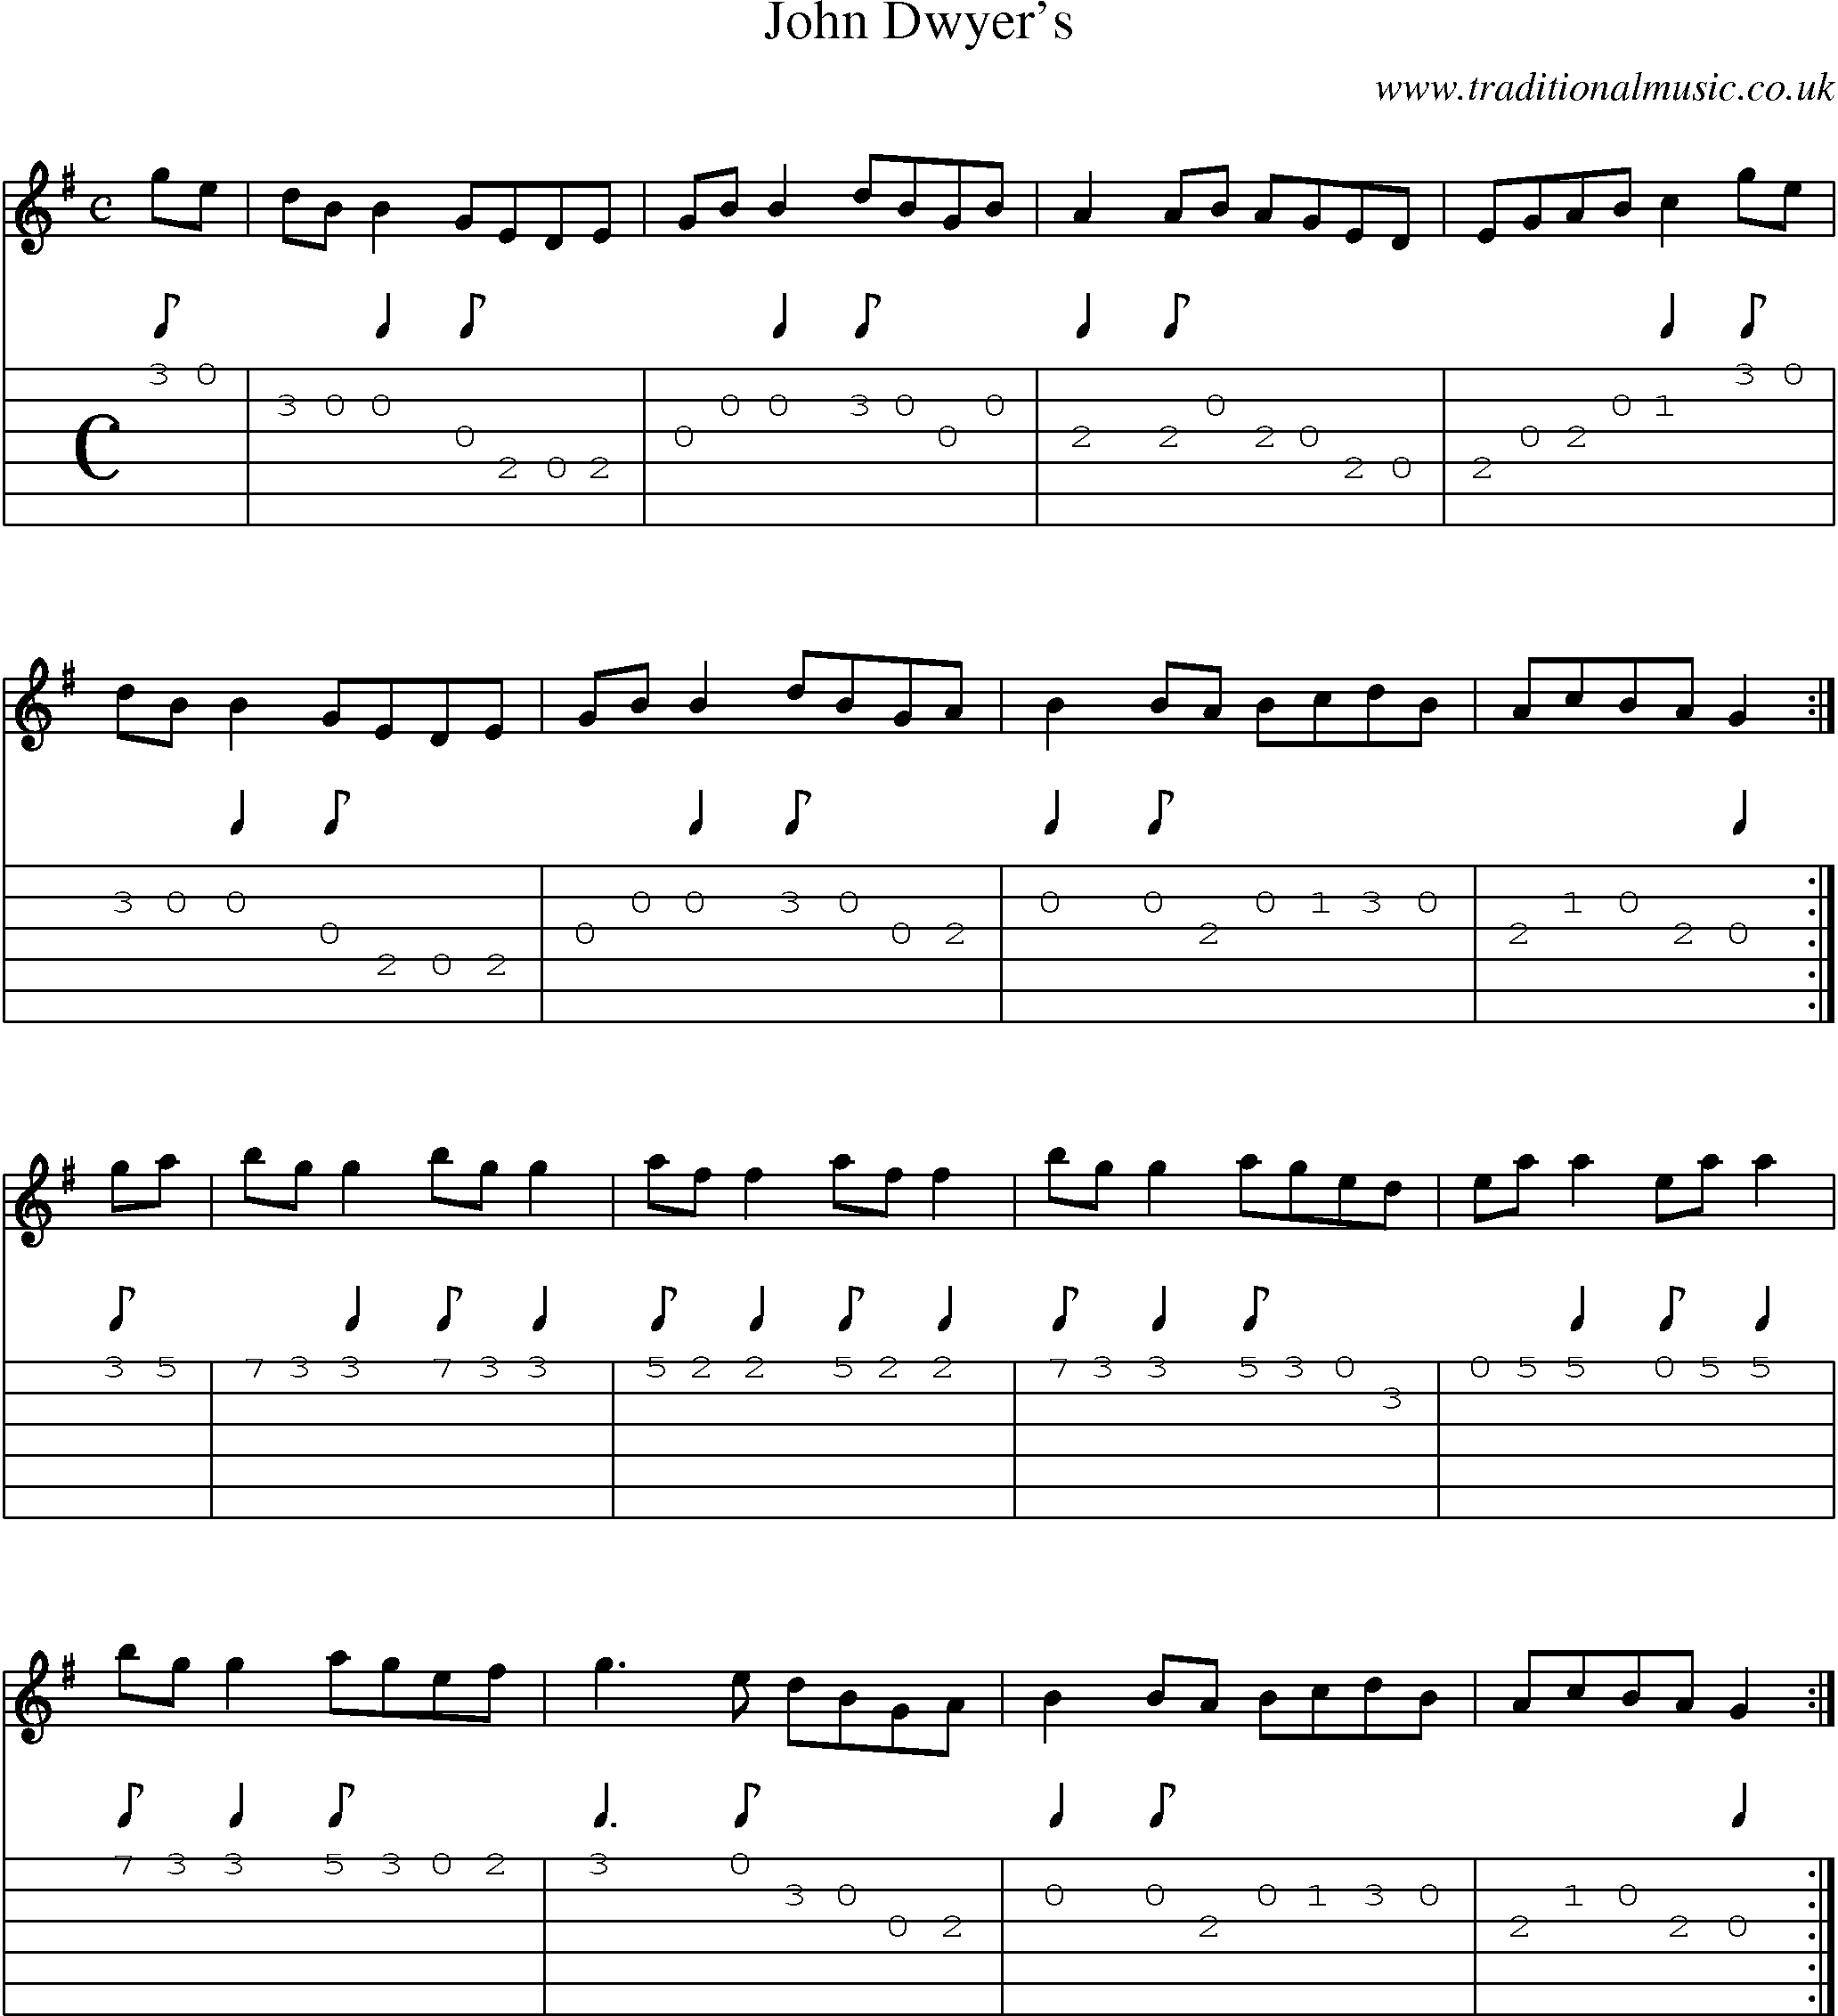 Music Score and Guitar Tabs for John Dwyers